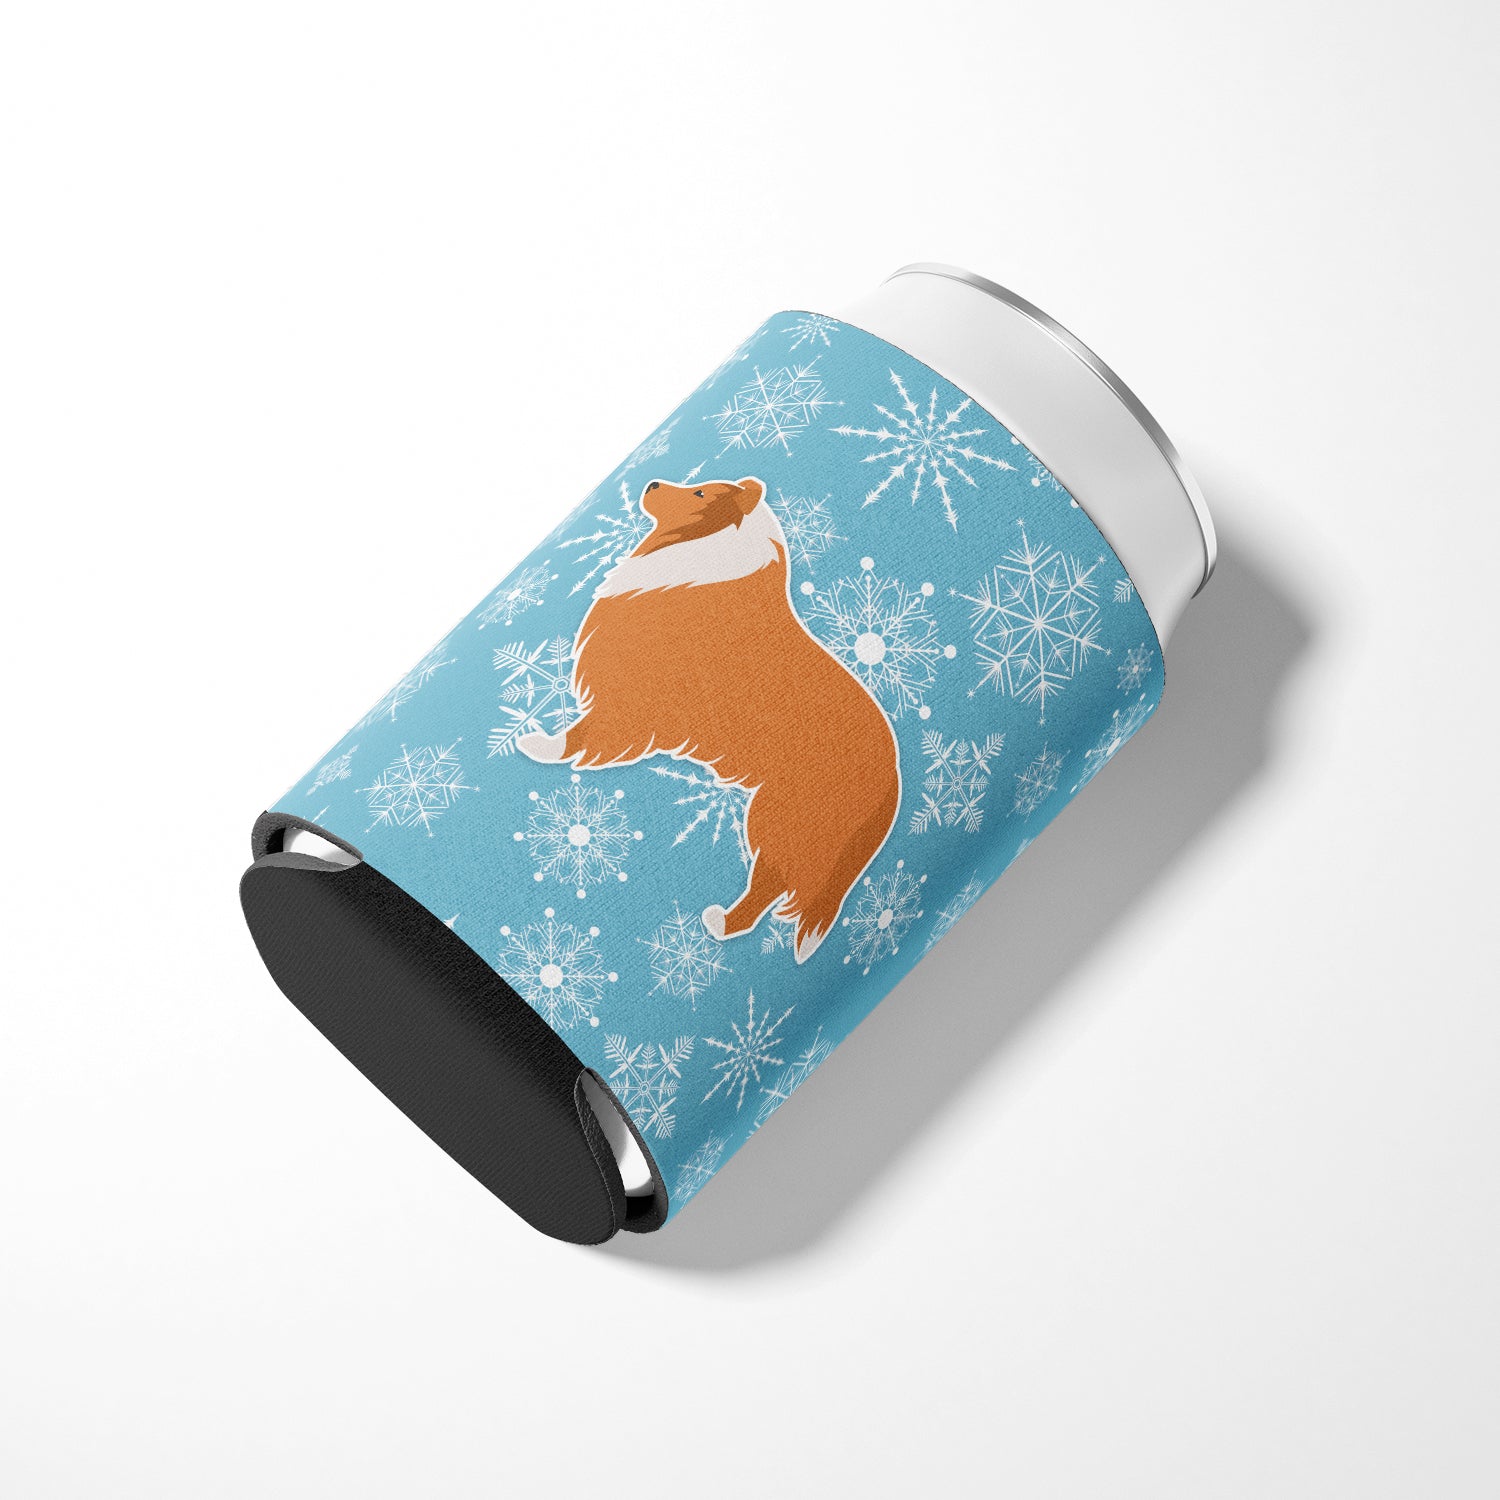 Winter Snowflake Collie Can or Bottle Hugger BB3516CC  the-store.com.